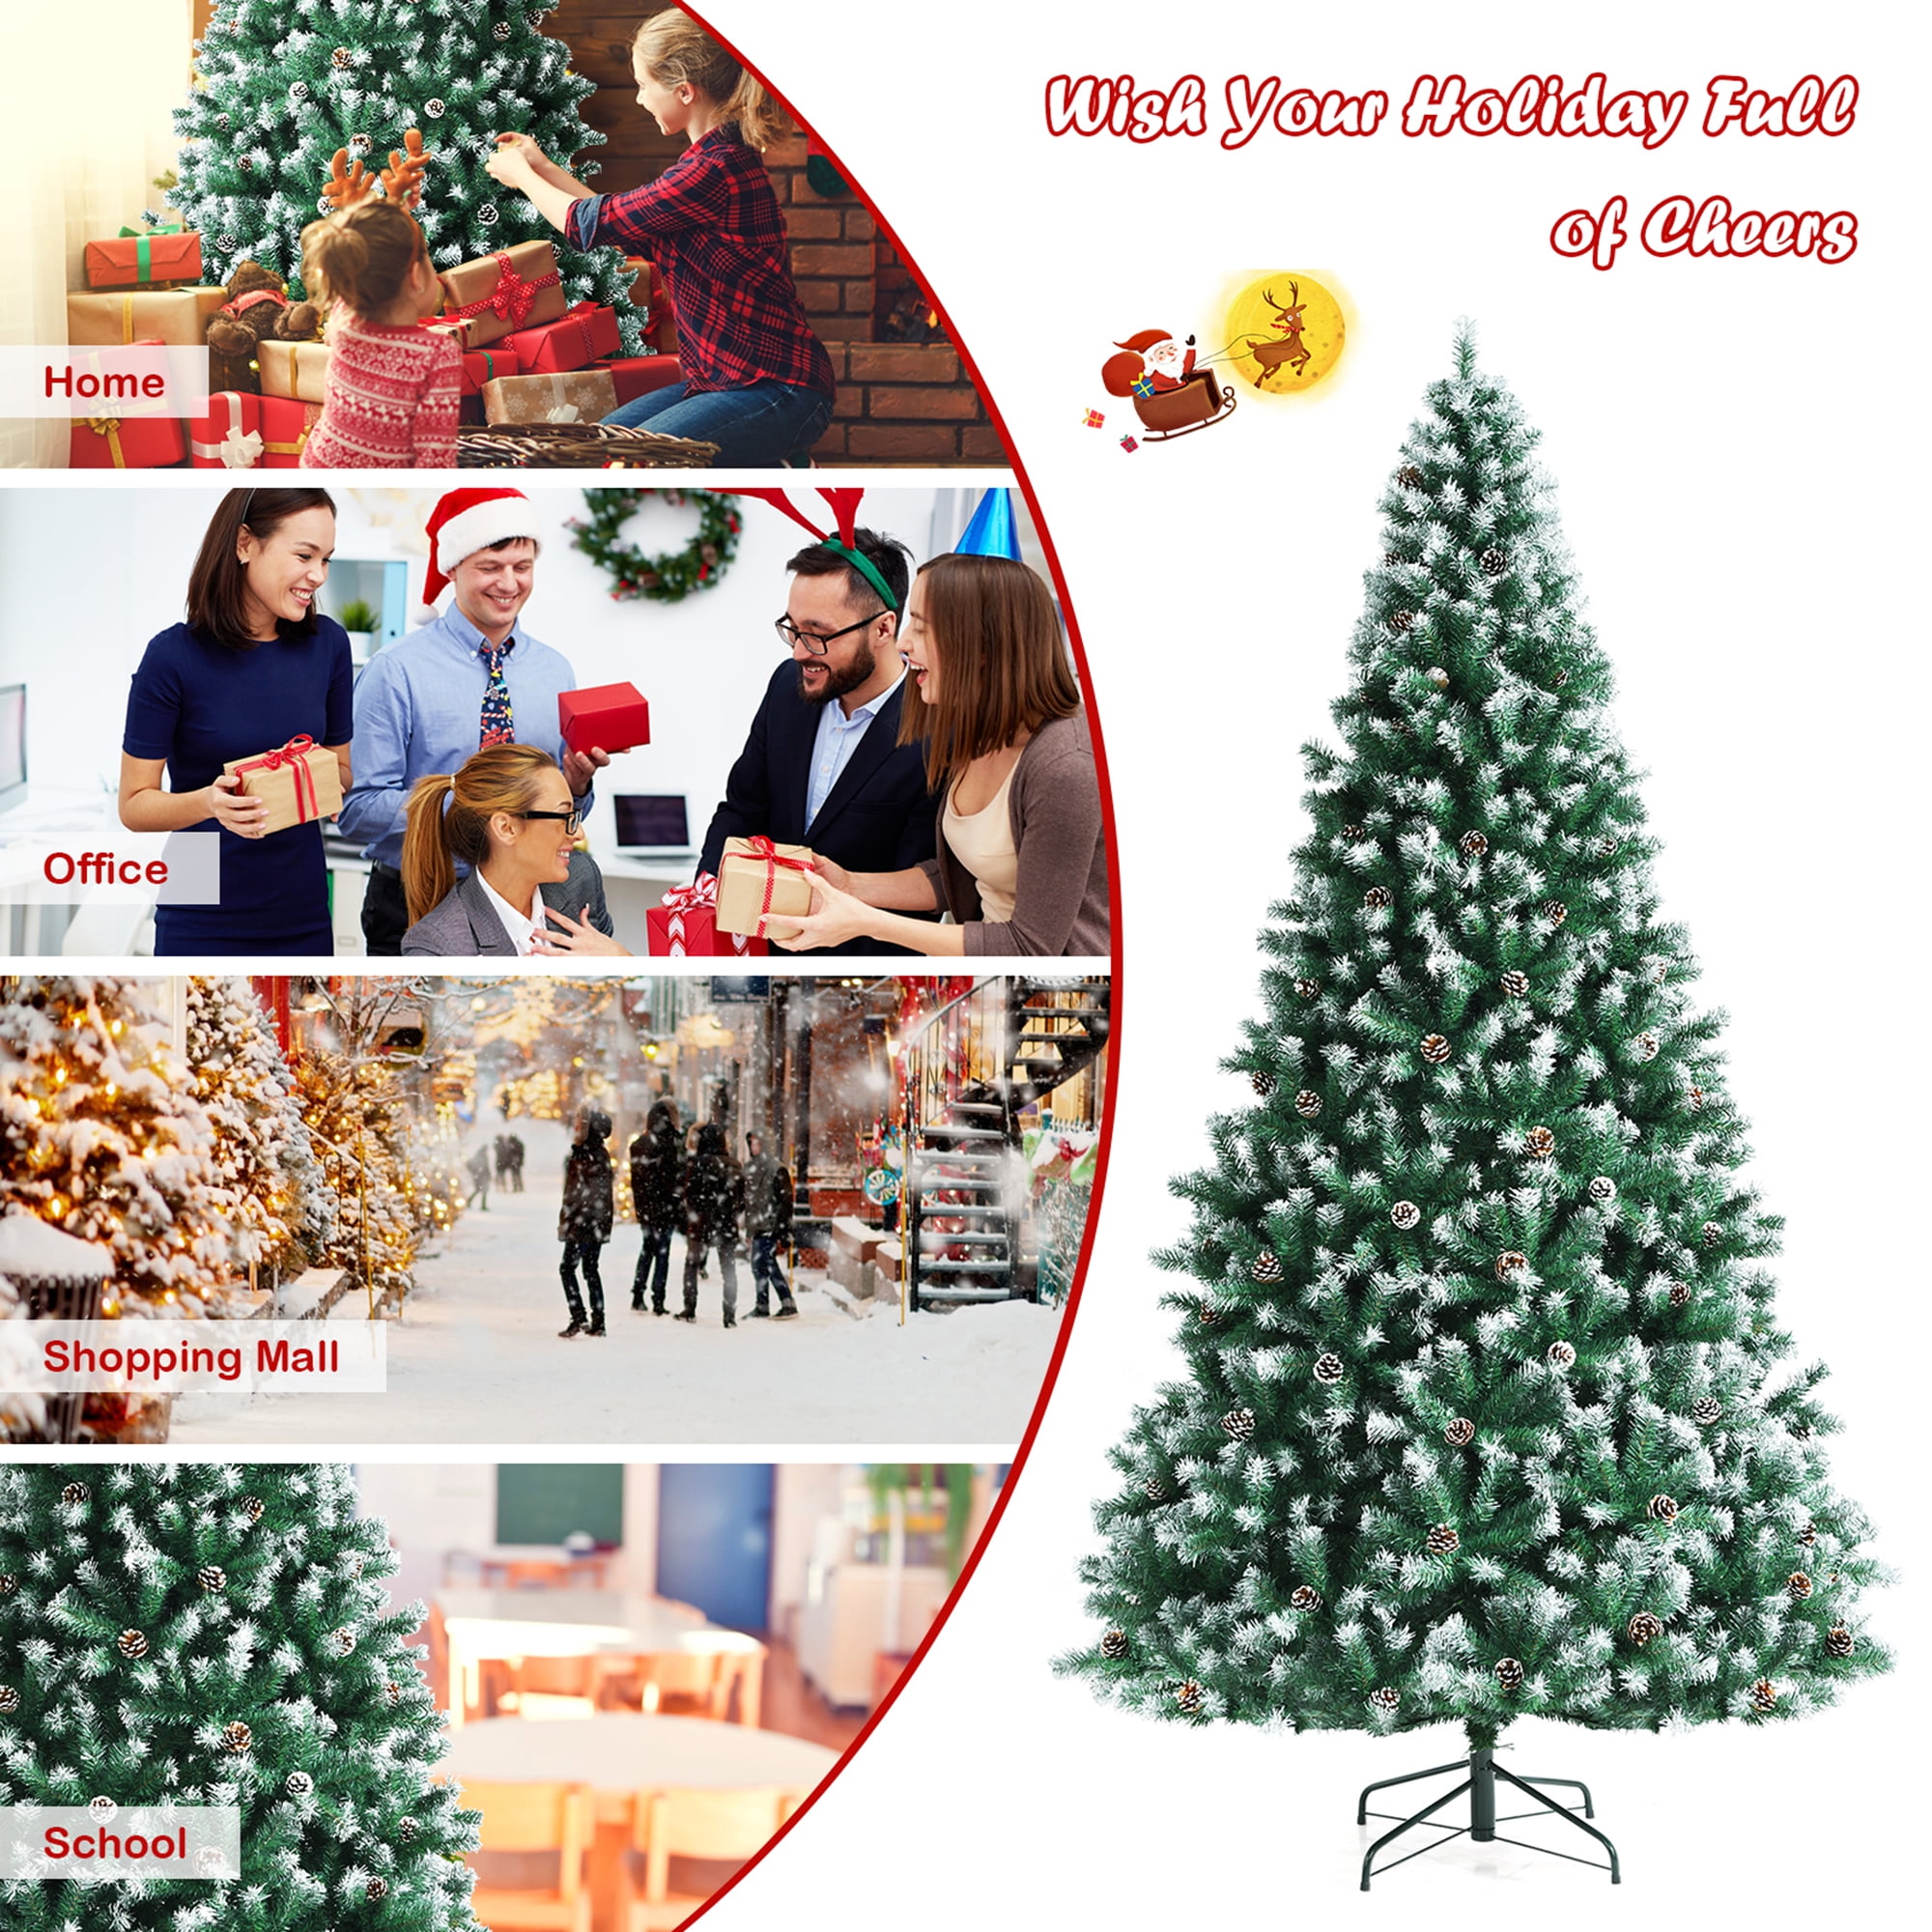 Family Dollar - ENDS TONIGHT! Get a 6-ft. artificial Christmas tree for $10  and get free* shipping with promo code 'TreeShipsFree' at checkout. You fir  sure don't want to miss this amazing